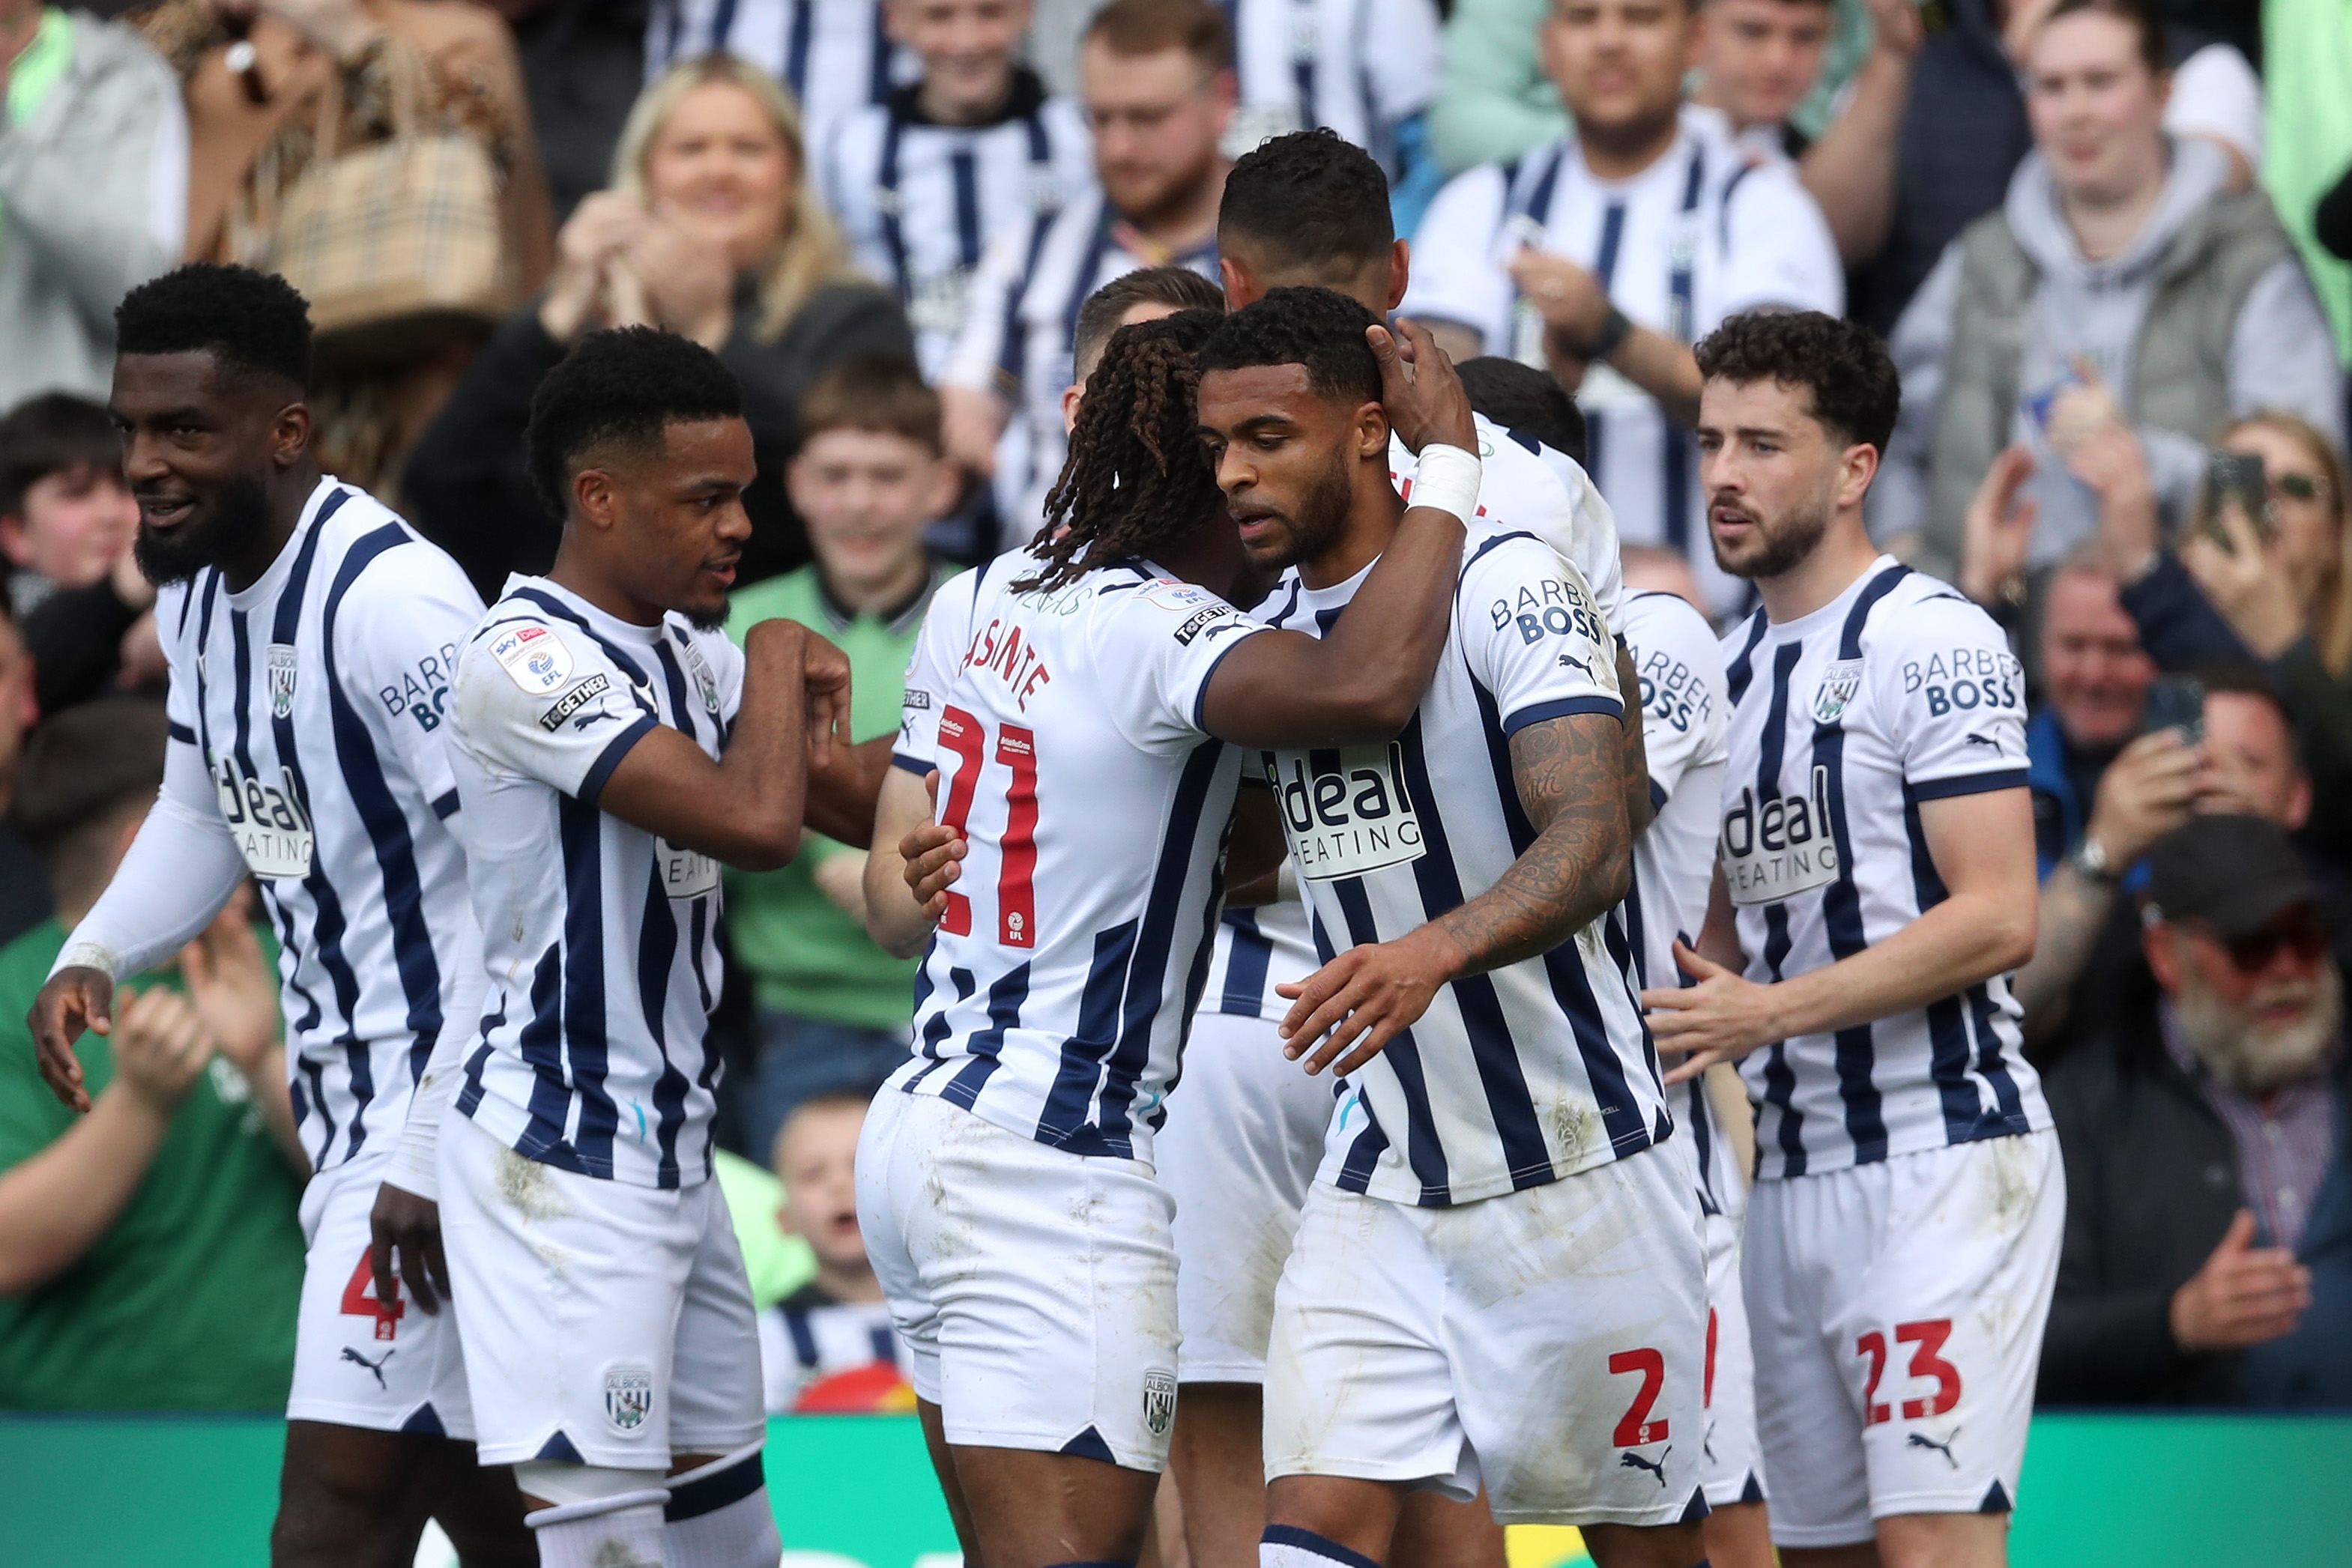 Albion players celebrate scoring a goal against Preston North End 